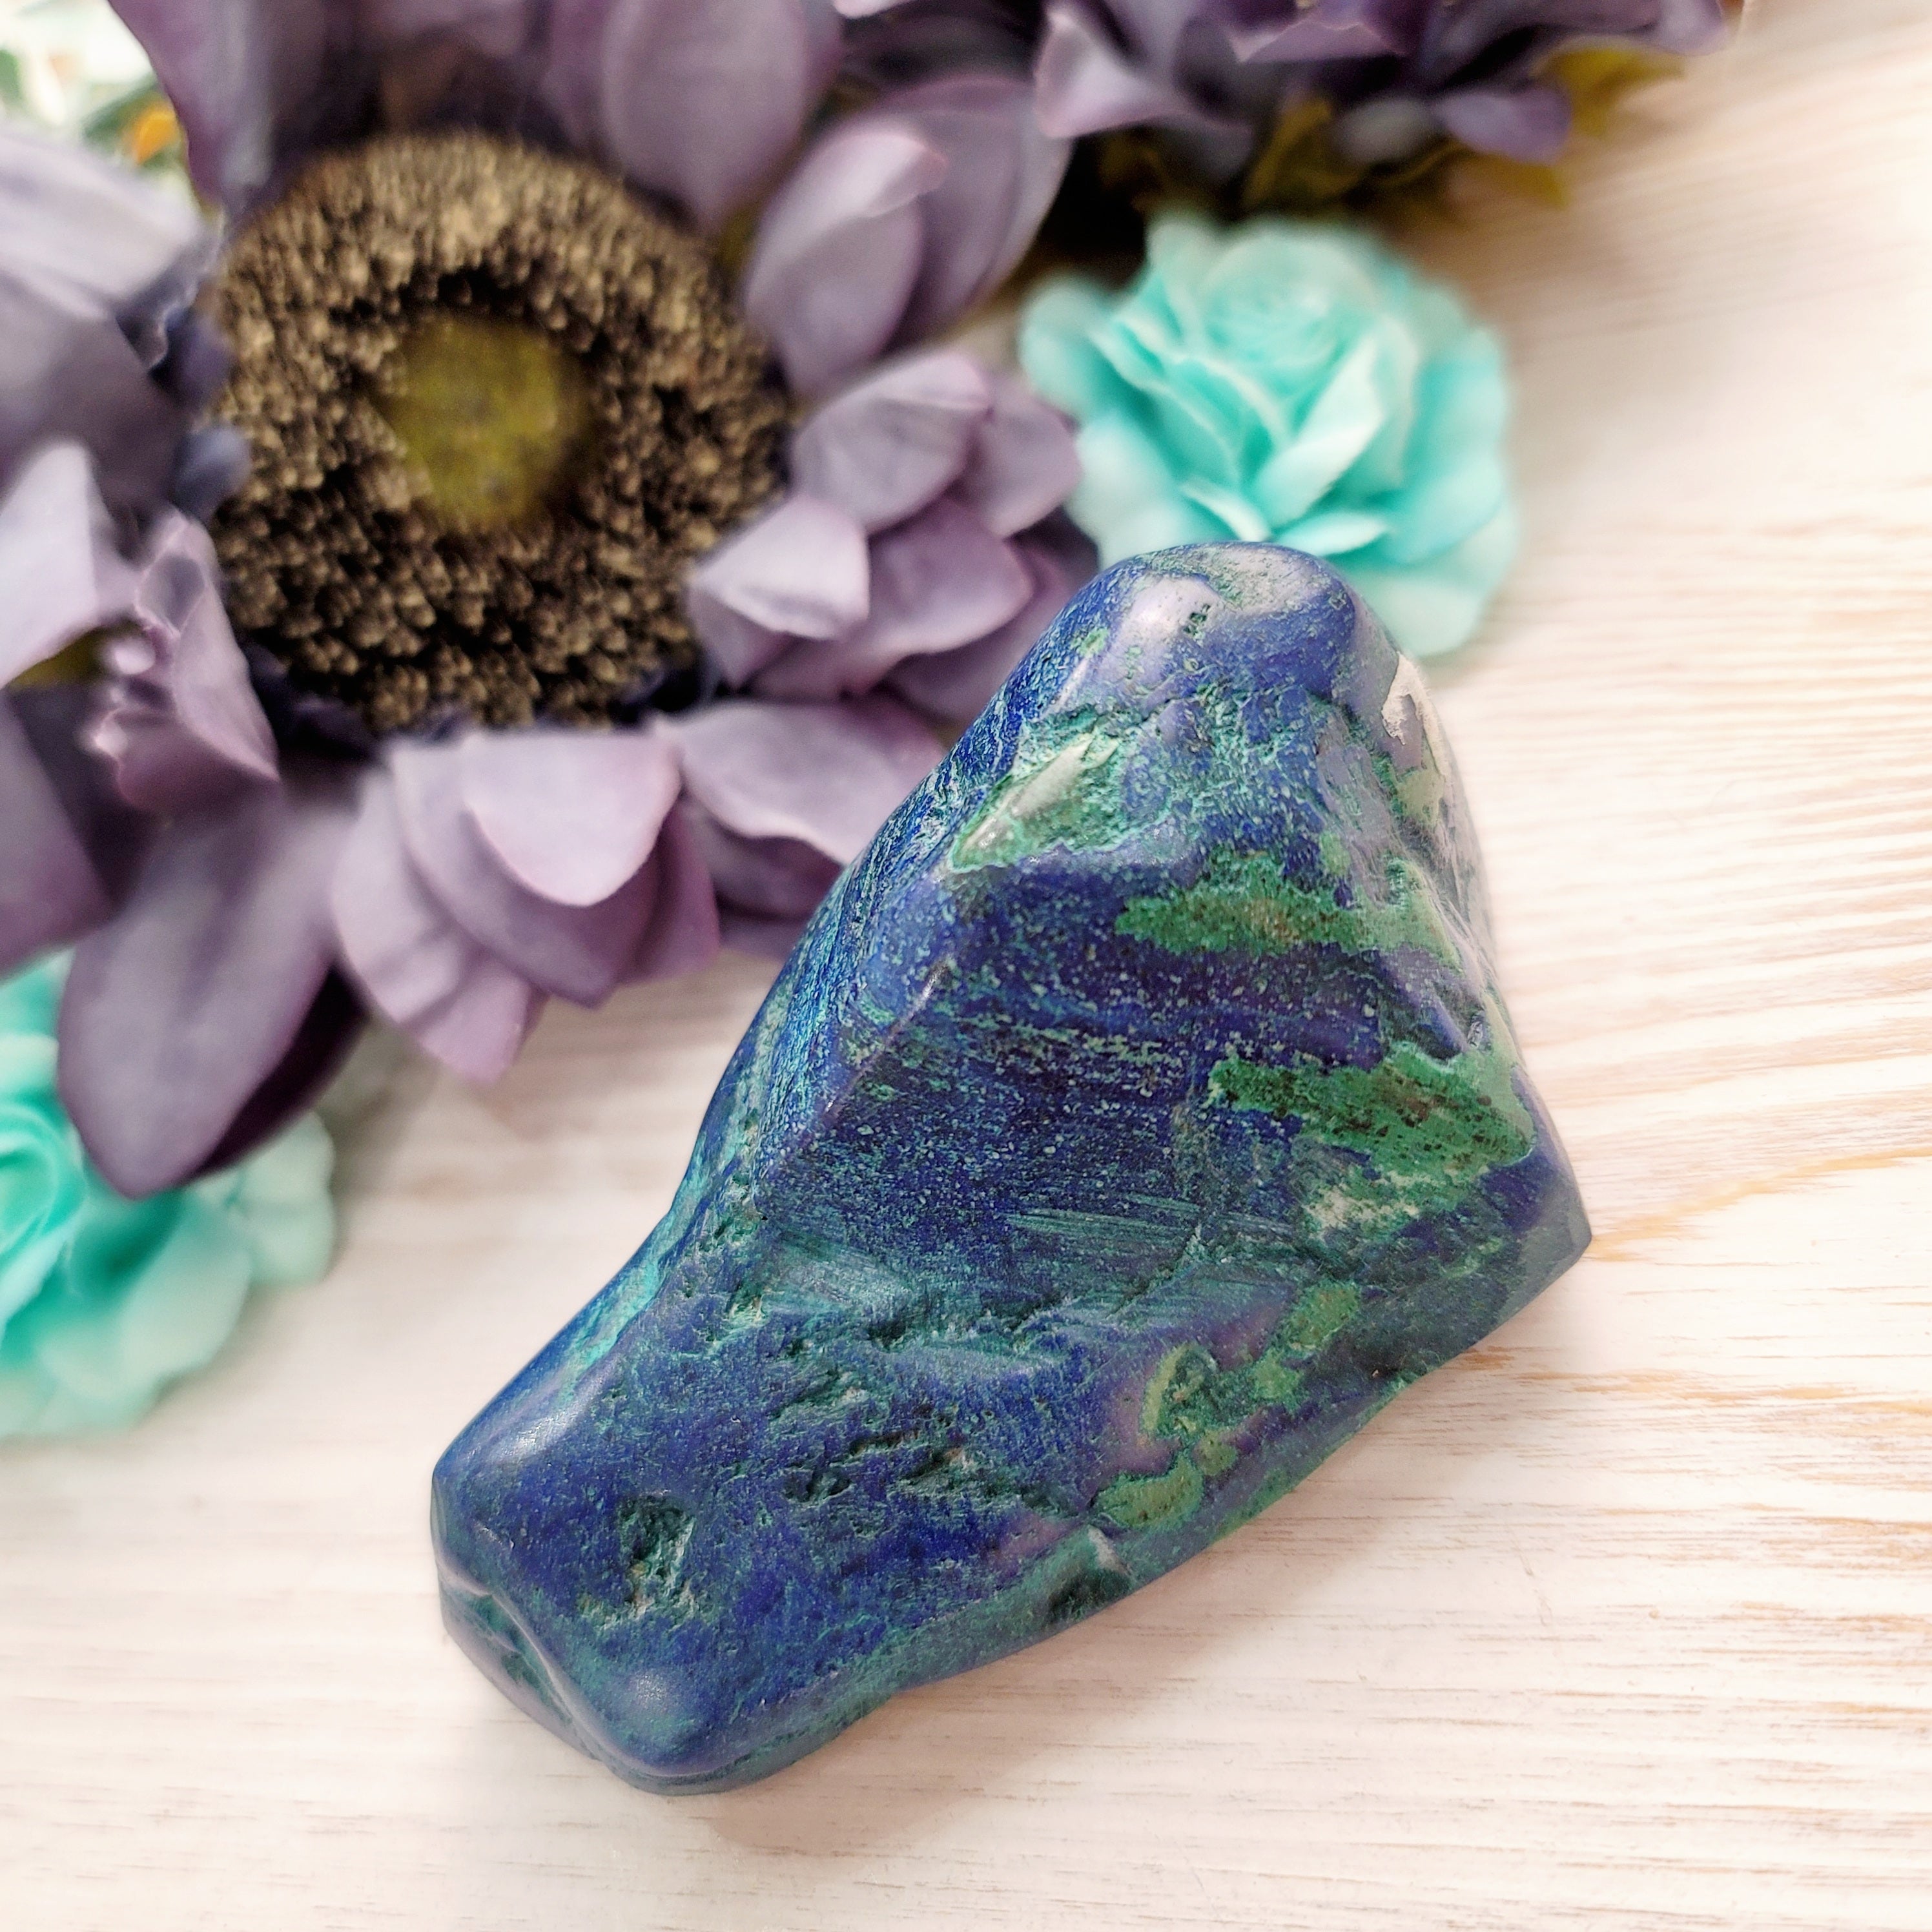 Shattuckite with Chrysocolla & Malachite for Communication, Empowerment, and Truth